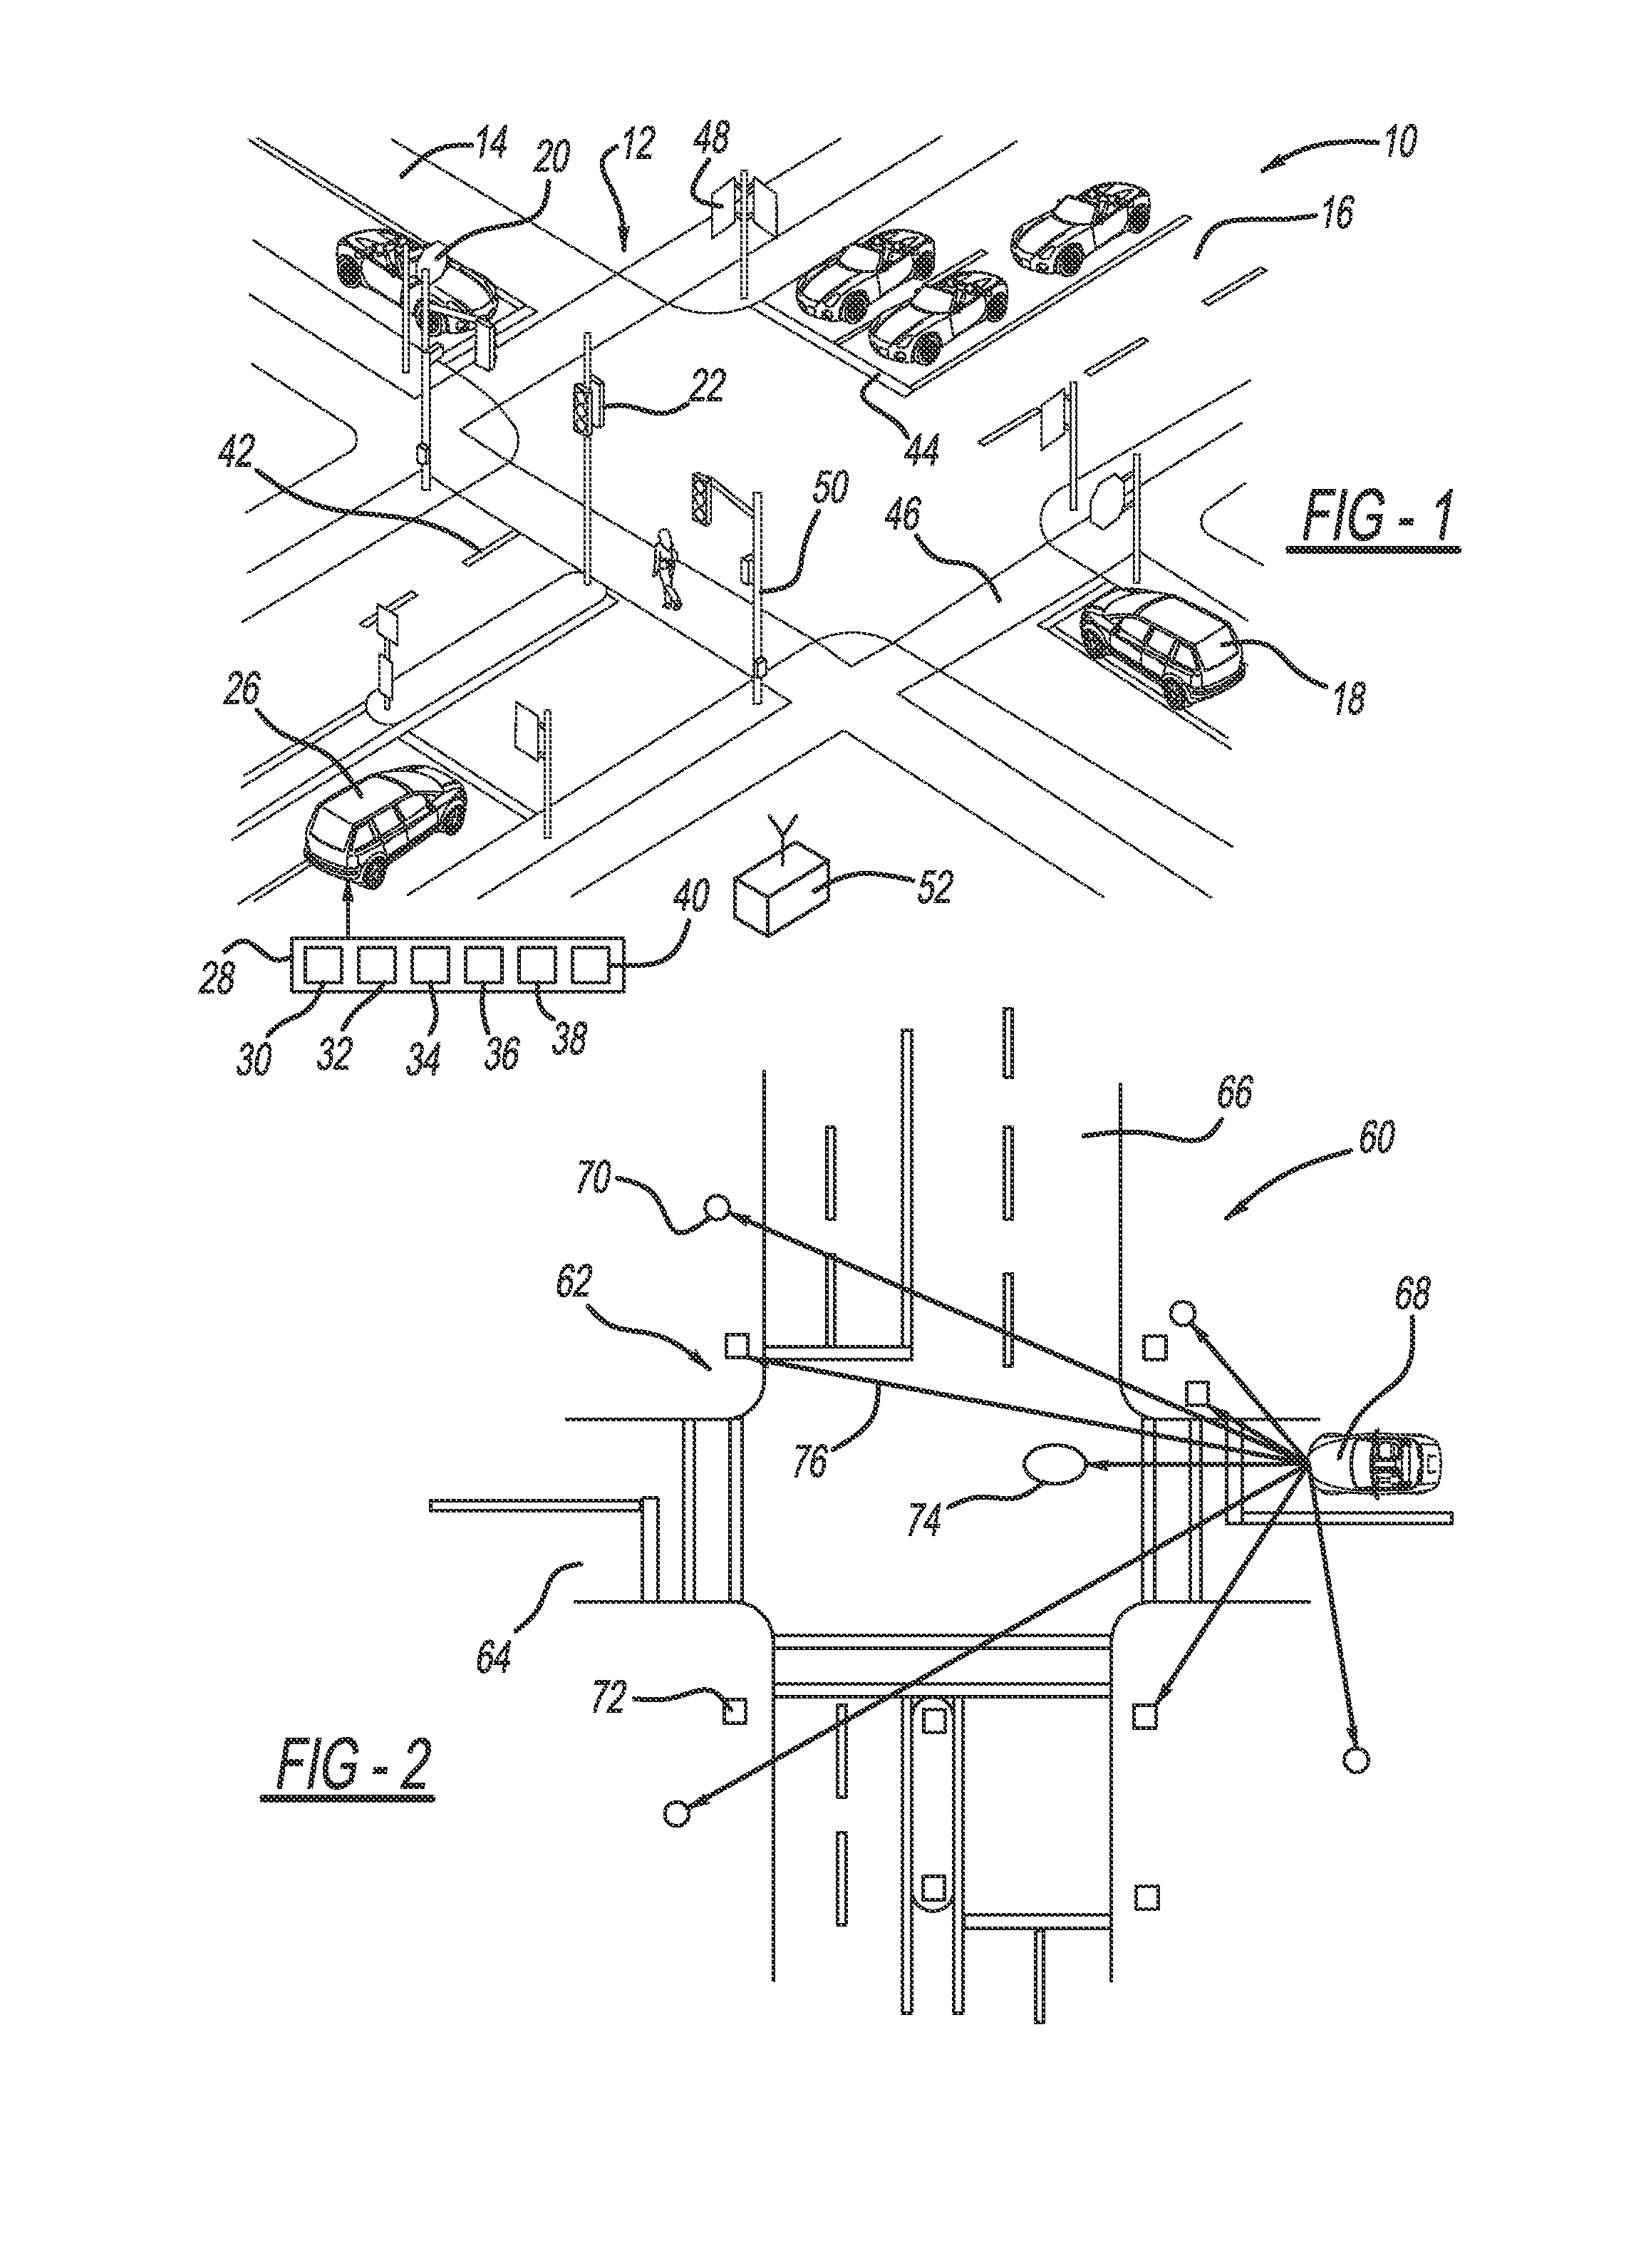 Vehicle positioning in intersection using visual cues, stationary objects, and GPS